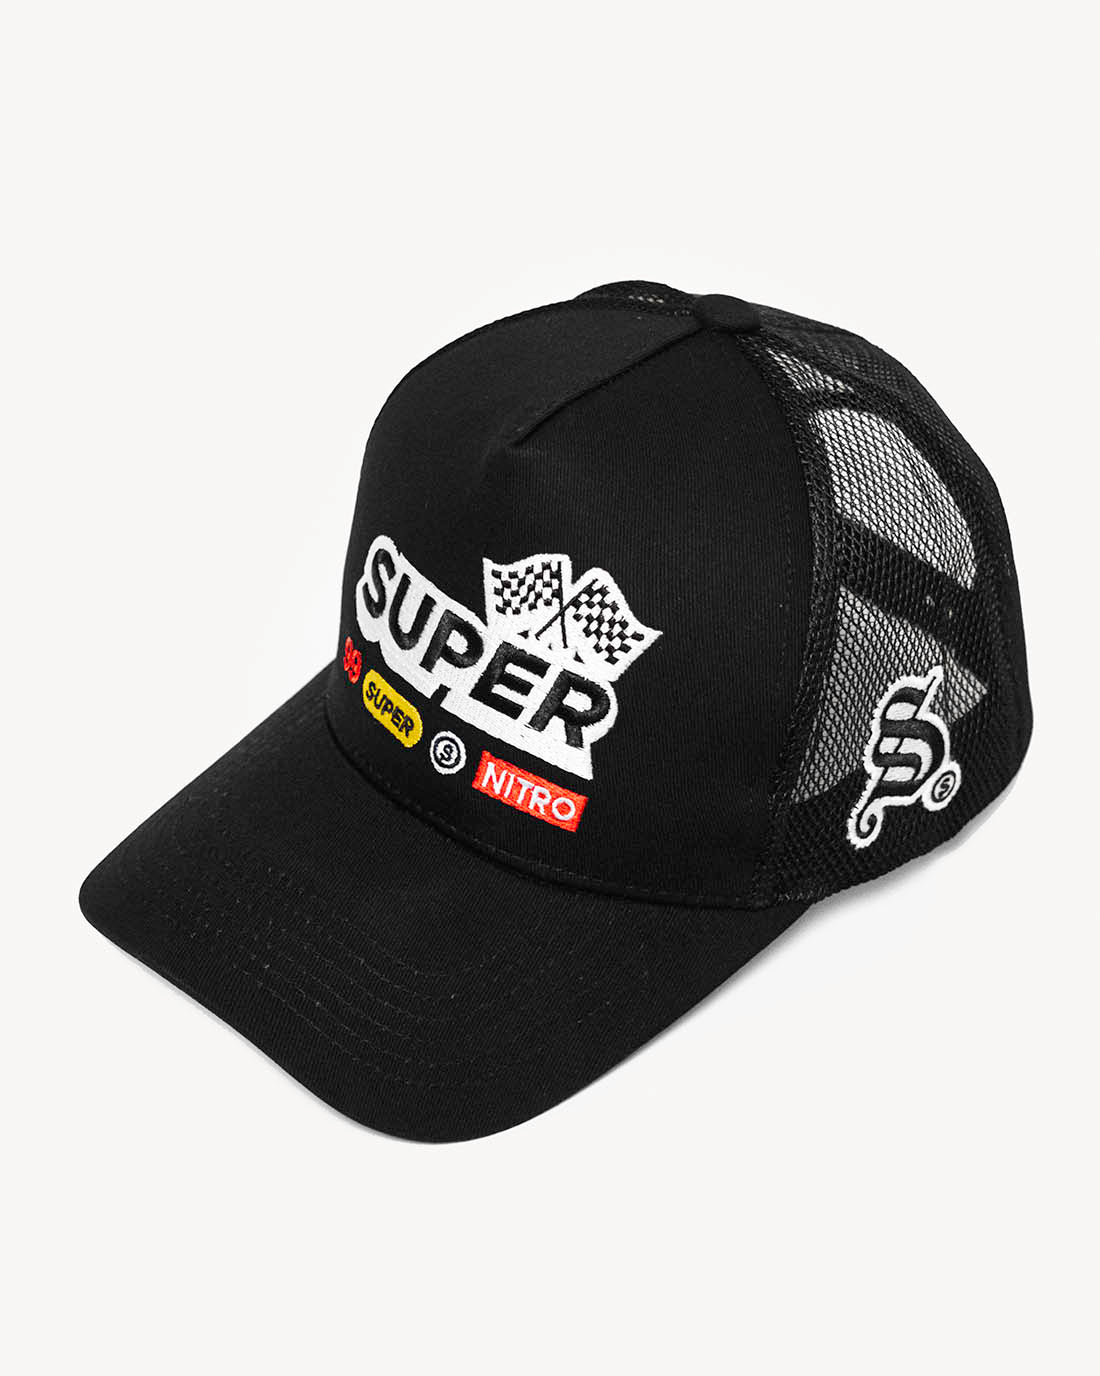 Front view of a sleek black snapback hat with stylish racing-inspired embroidered design and cooling mesh back.